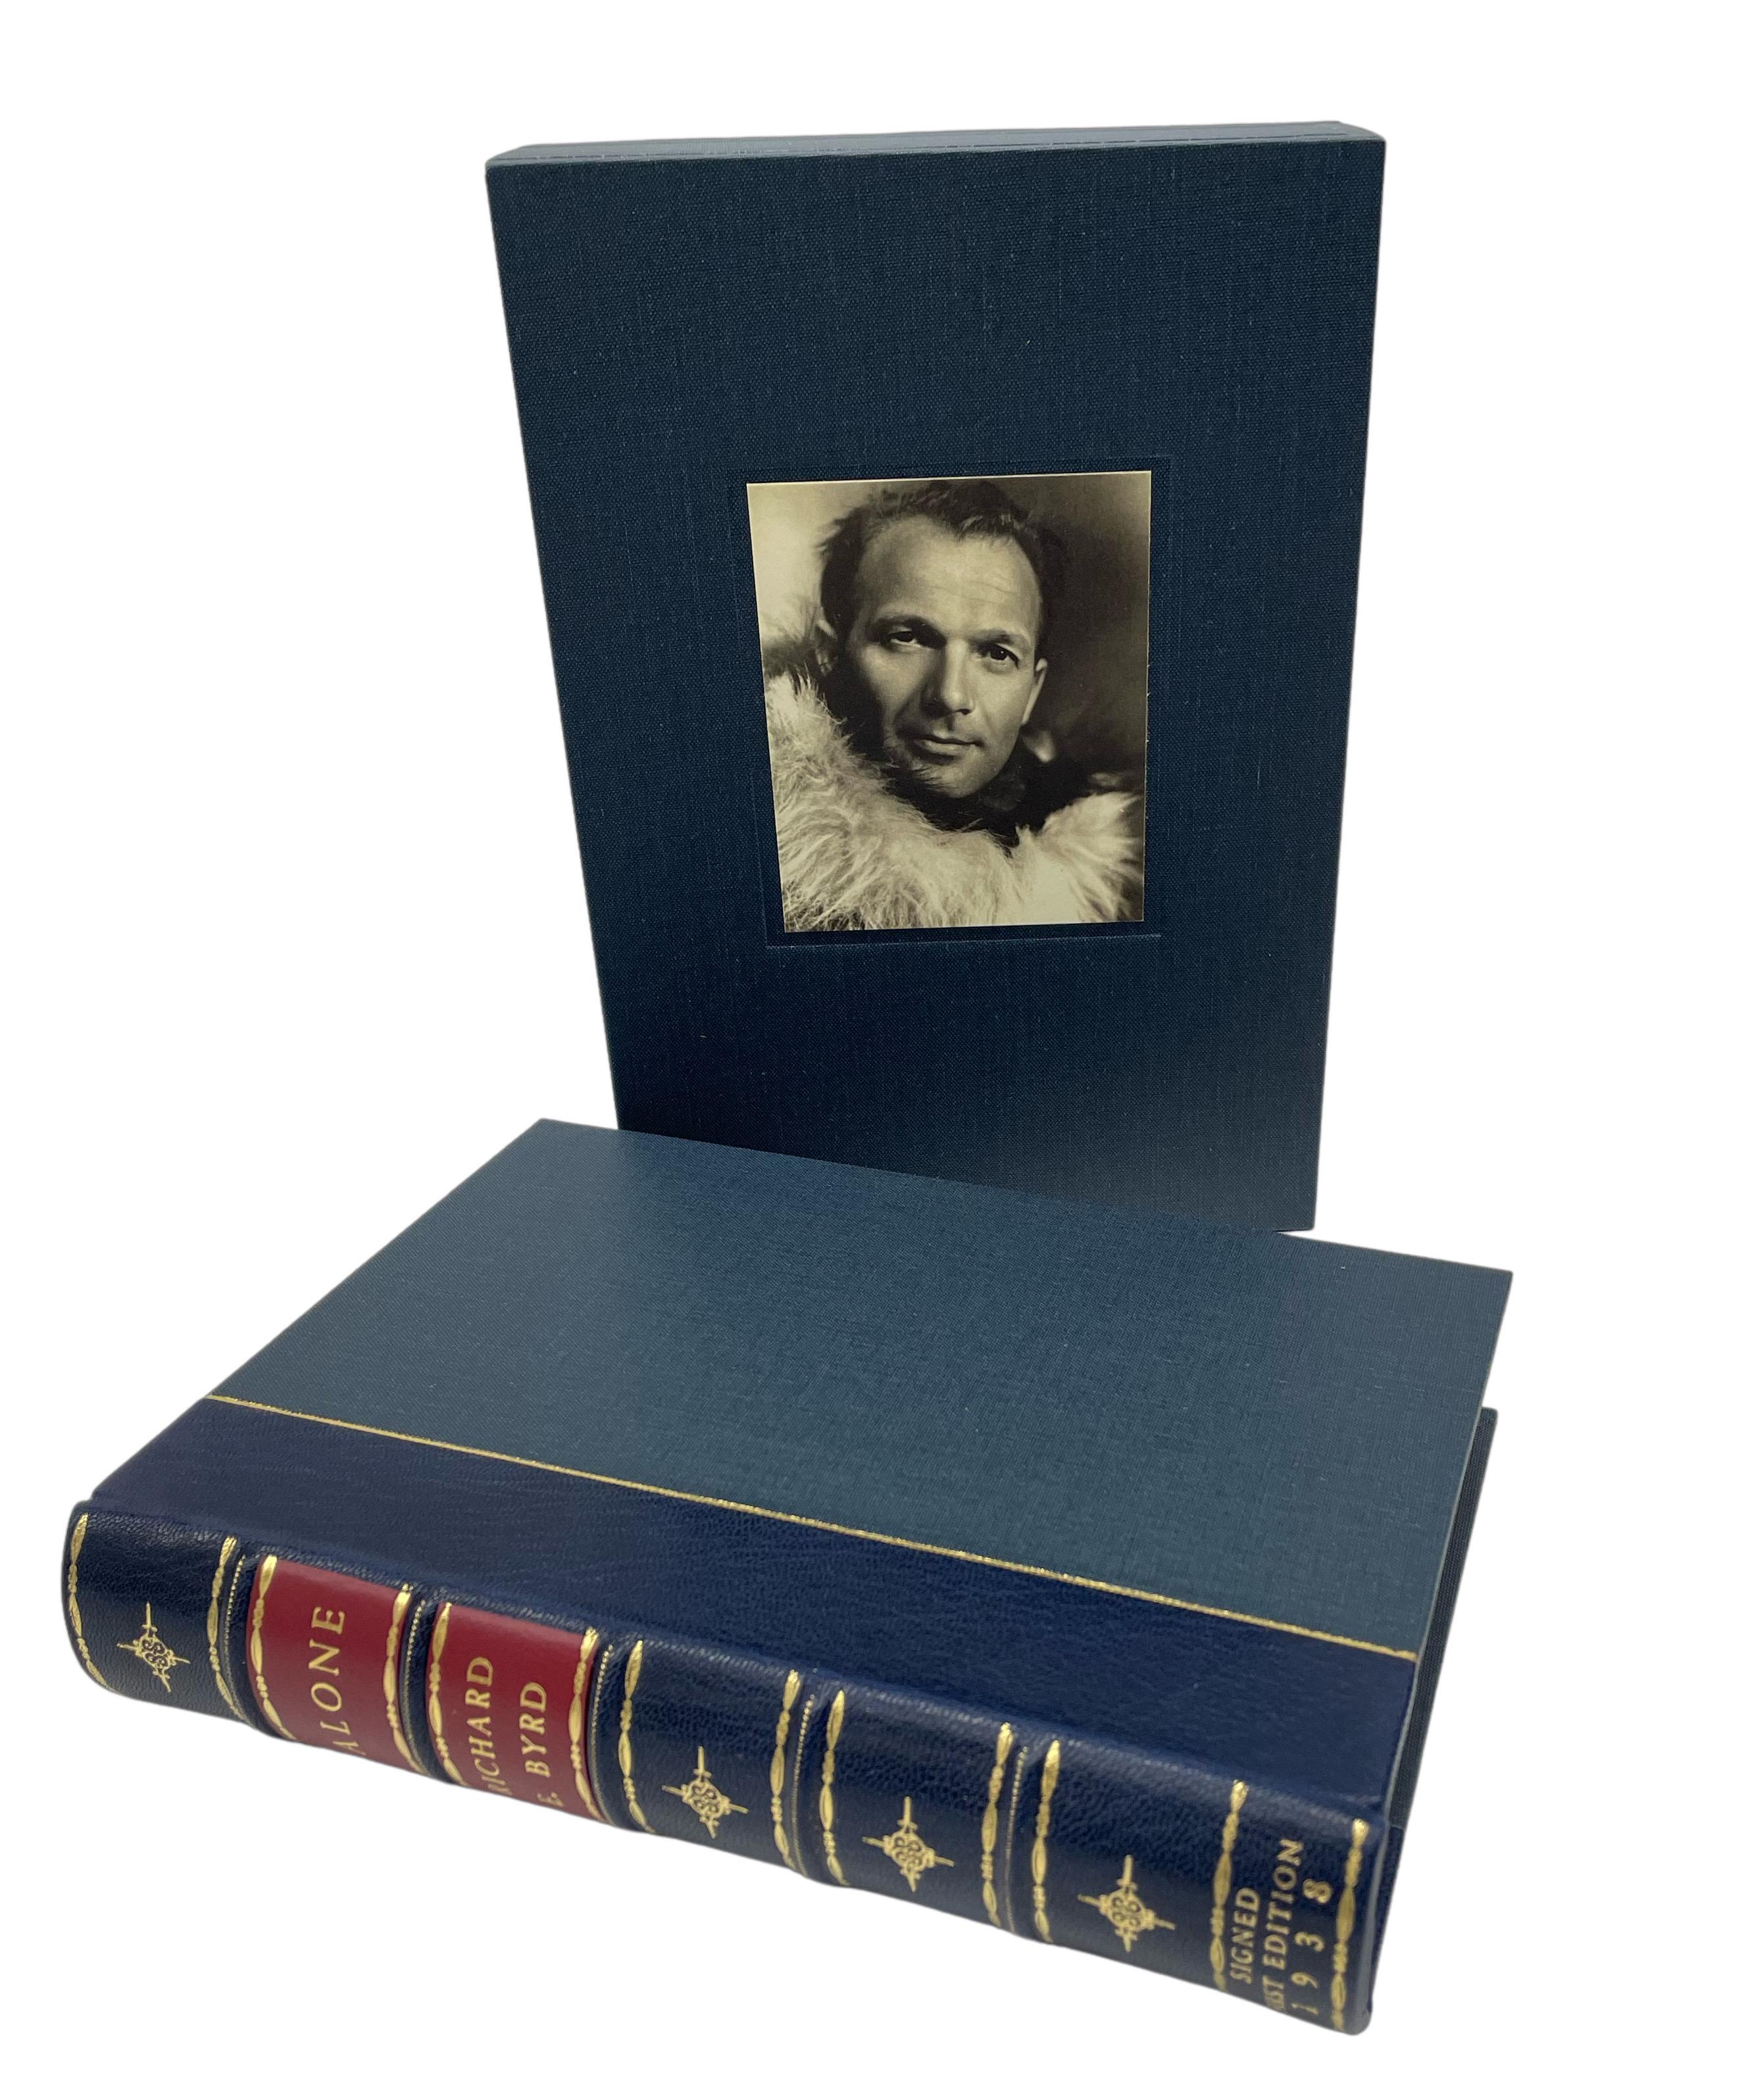 Byrd, Richard E, Alone. New York: G. P. Putnam's Sons, 1938. First edition, stated second impression. Signed by Byrd on free end paper. Octavo. Presented in quarter blue Moroccan leather and cloth binding, with gilt titles and stamps to the spine,